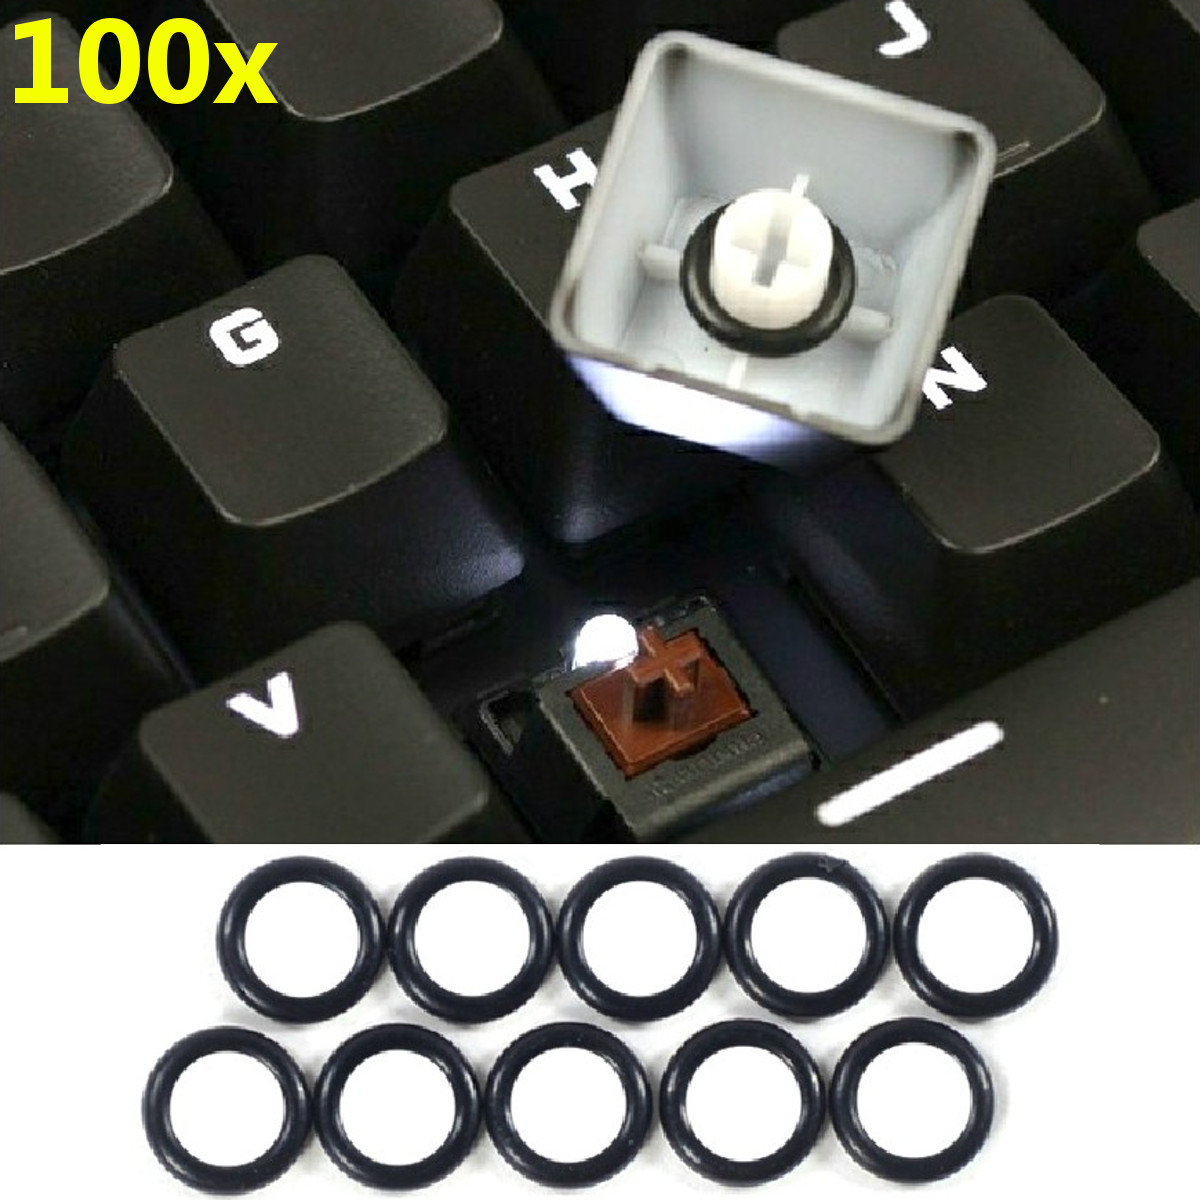 100 Mechanical Keyboard Keycap Rubber O-Ring Switch Dampeners for Cherry MX 5